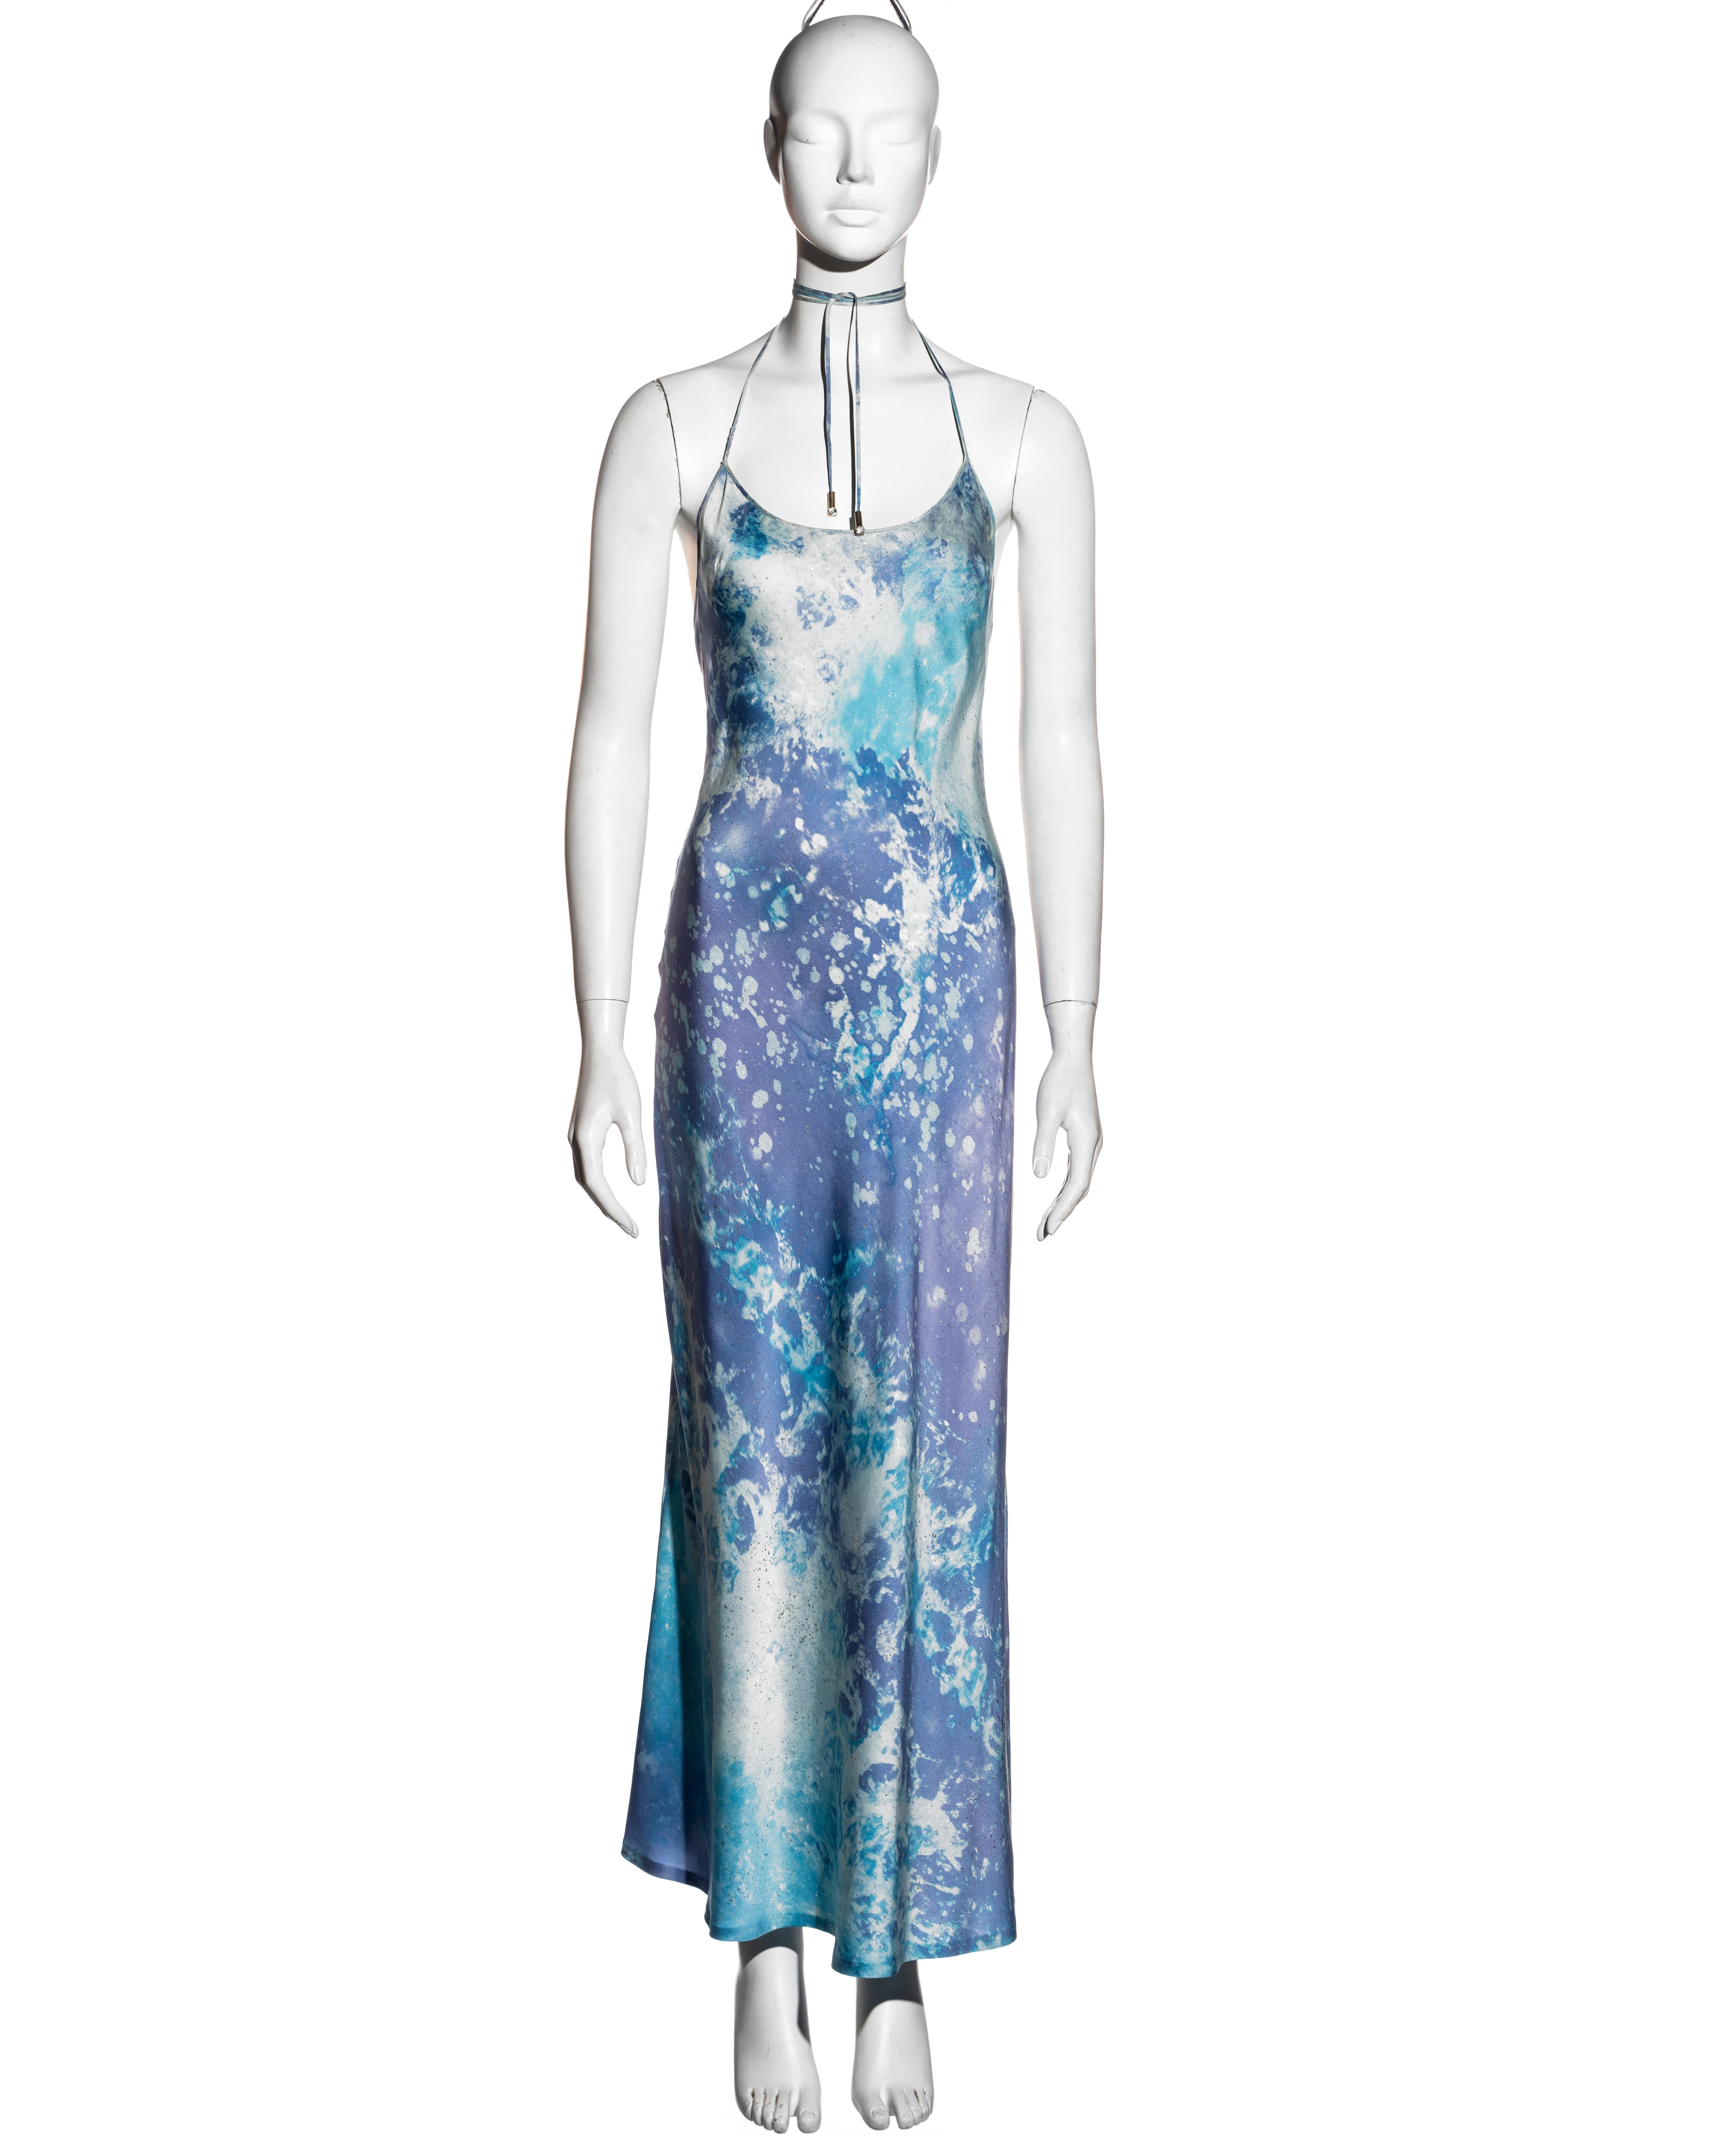 ▪ Roberto Cavalli blue and purple silk maxi dress
▪ Acid wash print with gold glitter 
▪ Scoop neck
▪ Halter ties with crystal charms 
▪ Size Medium
▪ Spring-Summer 1999
▪ 100% Silk